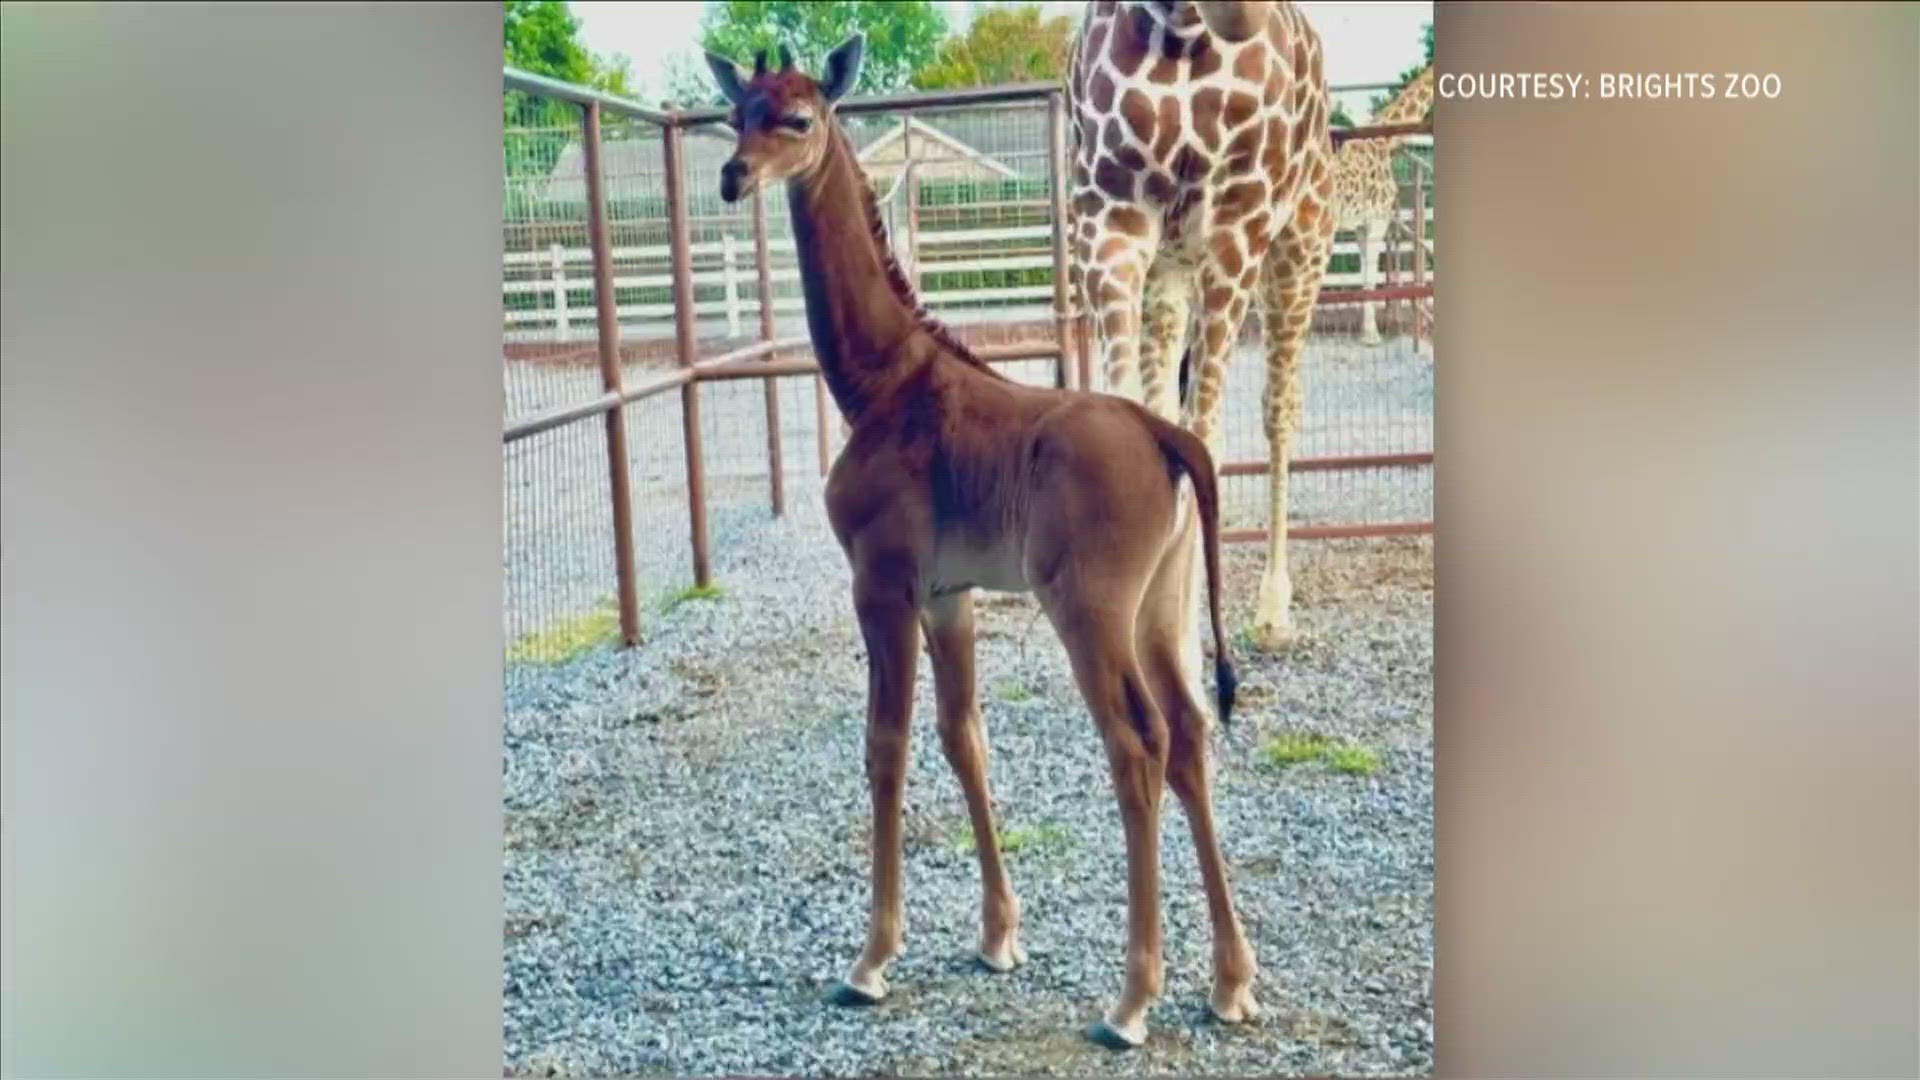 A newborn giraffe is gaining worldwide attention because it has no coat pattern, which is extremely rare. The Brights Zoo is holding a contest to name her.